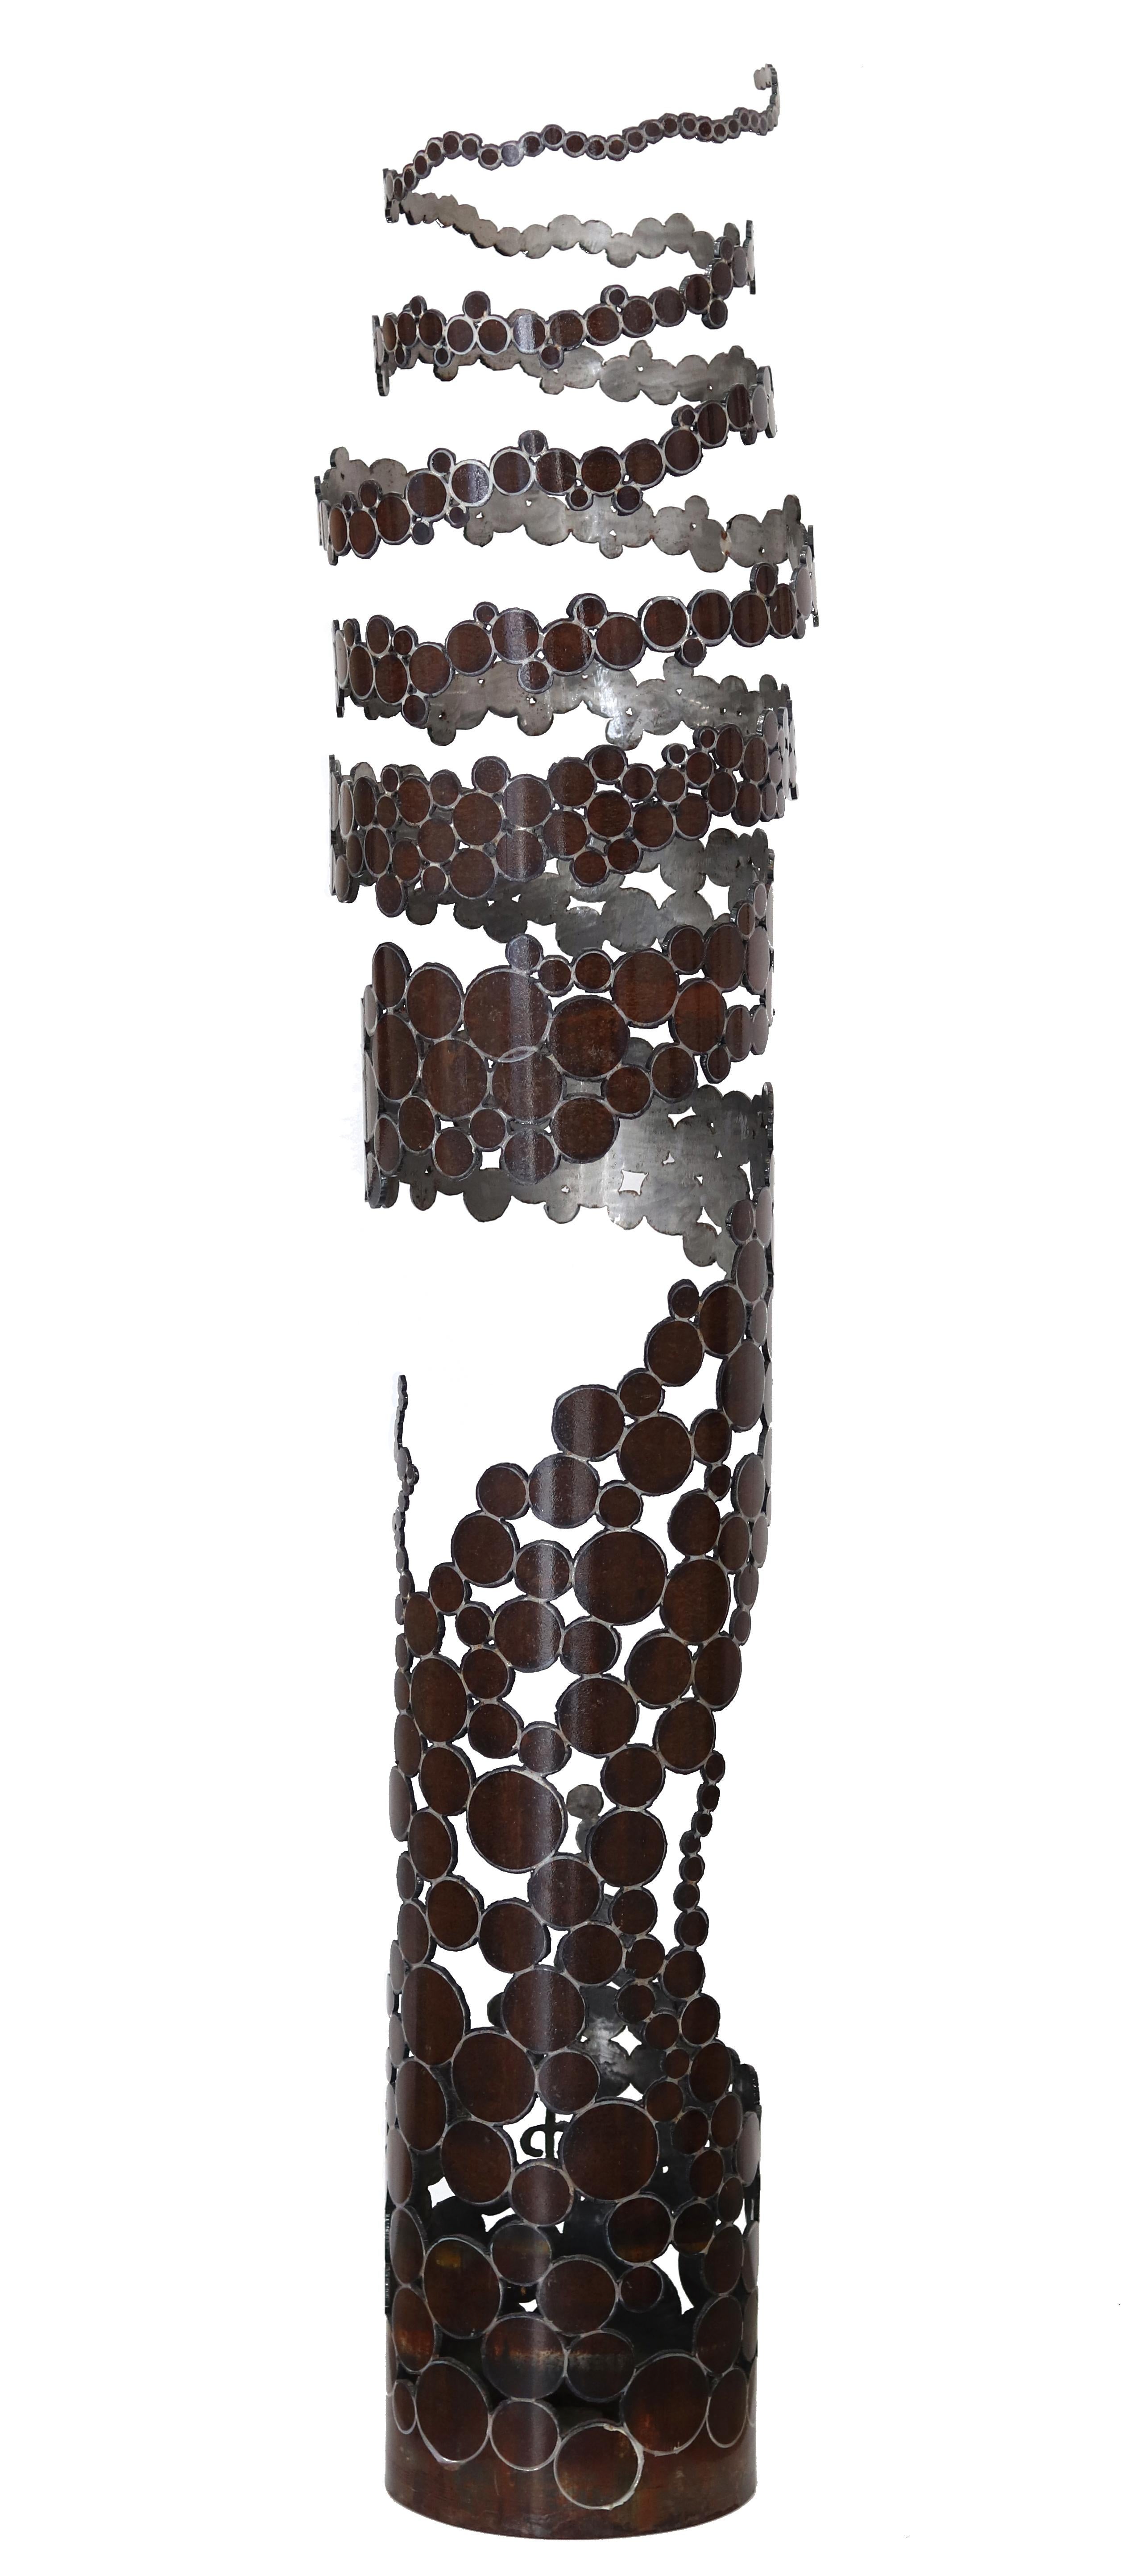 D'Arcy Bellamy Abstract Sculpture - Soothing Repetition  -  Large Oversized Steel Sculpture for Outdoors and Indoors